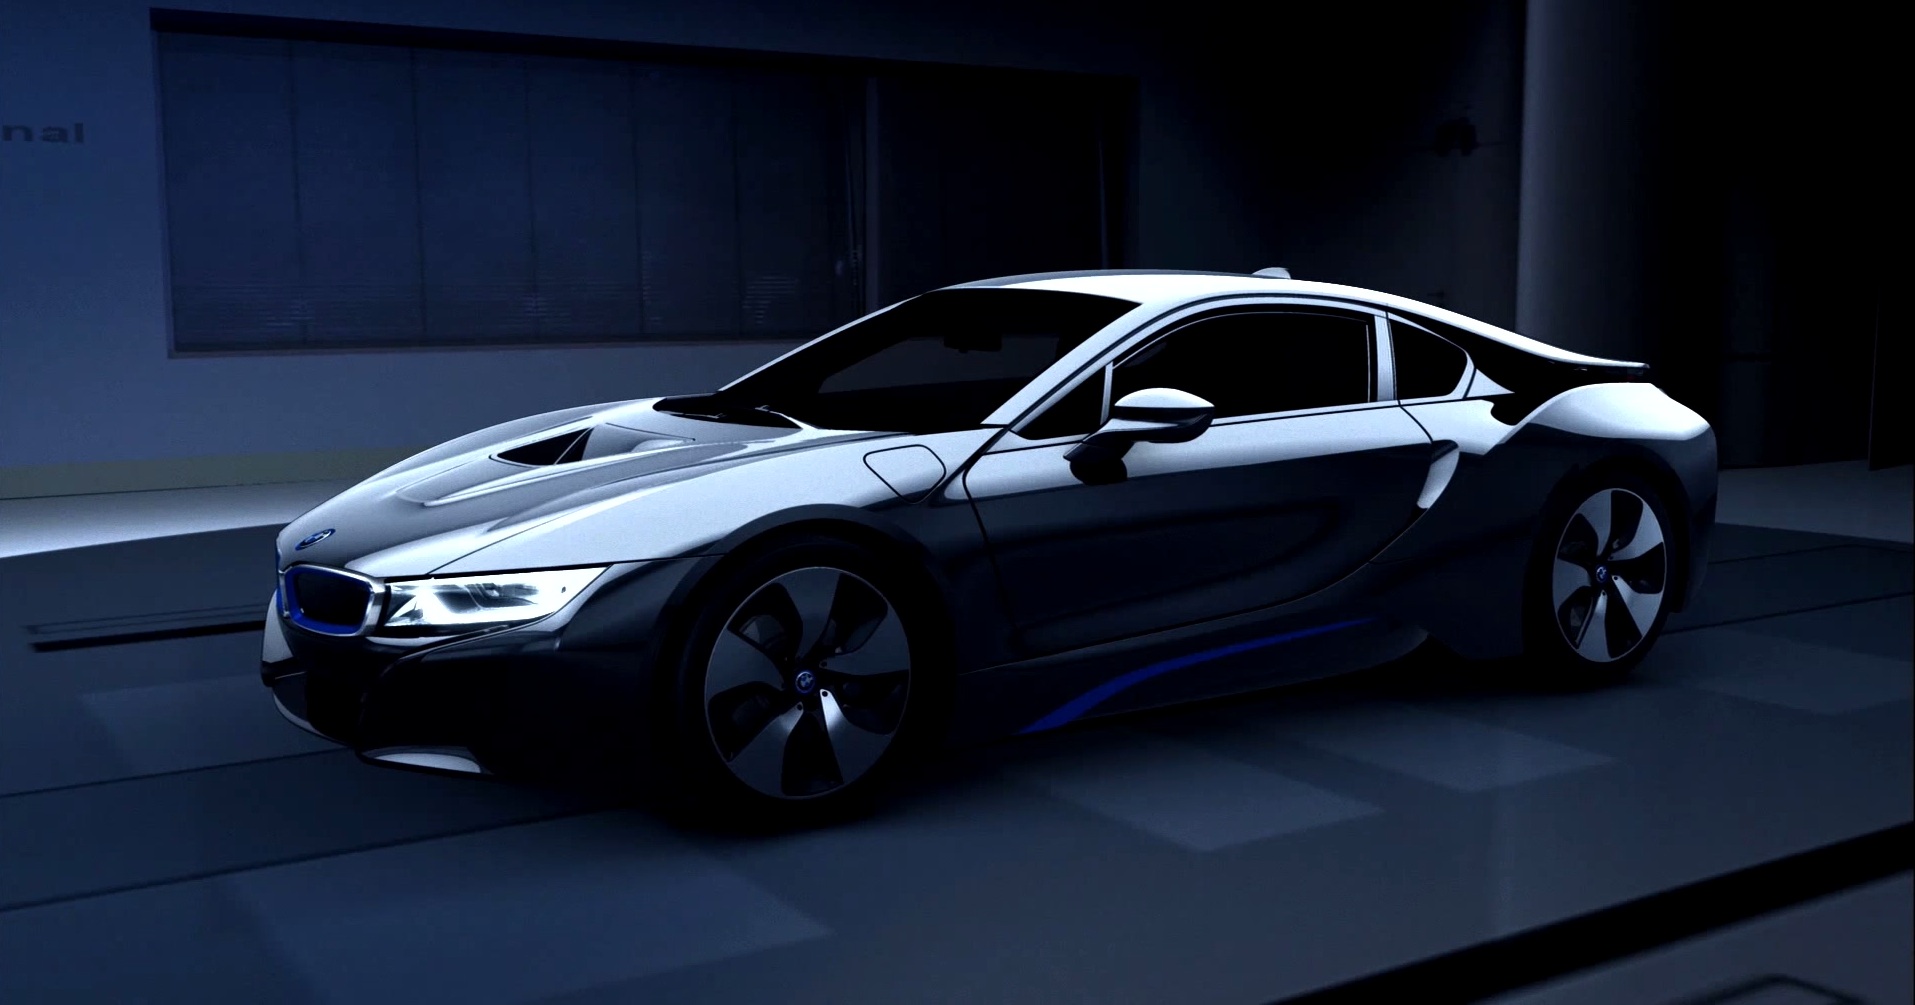 How it’s made: BMW i8 explained